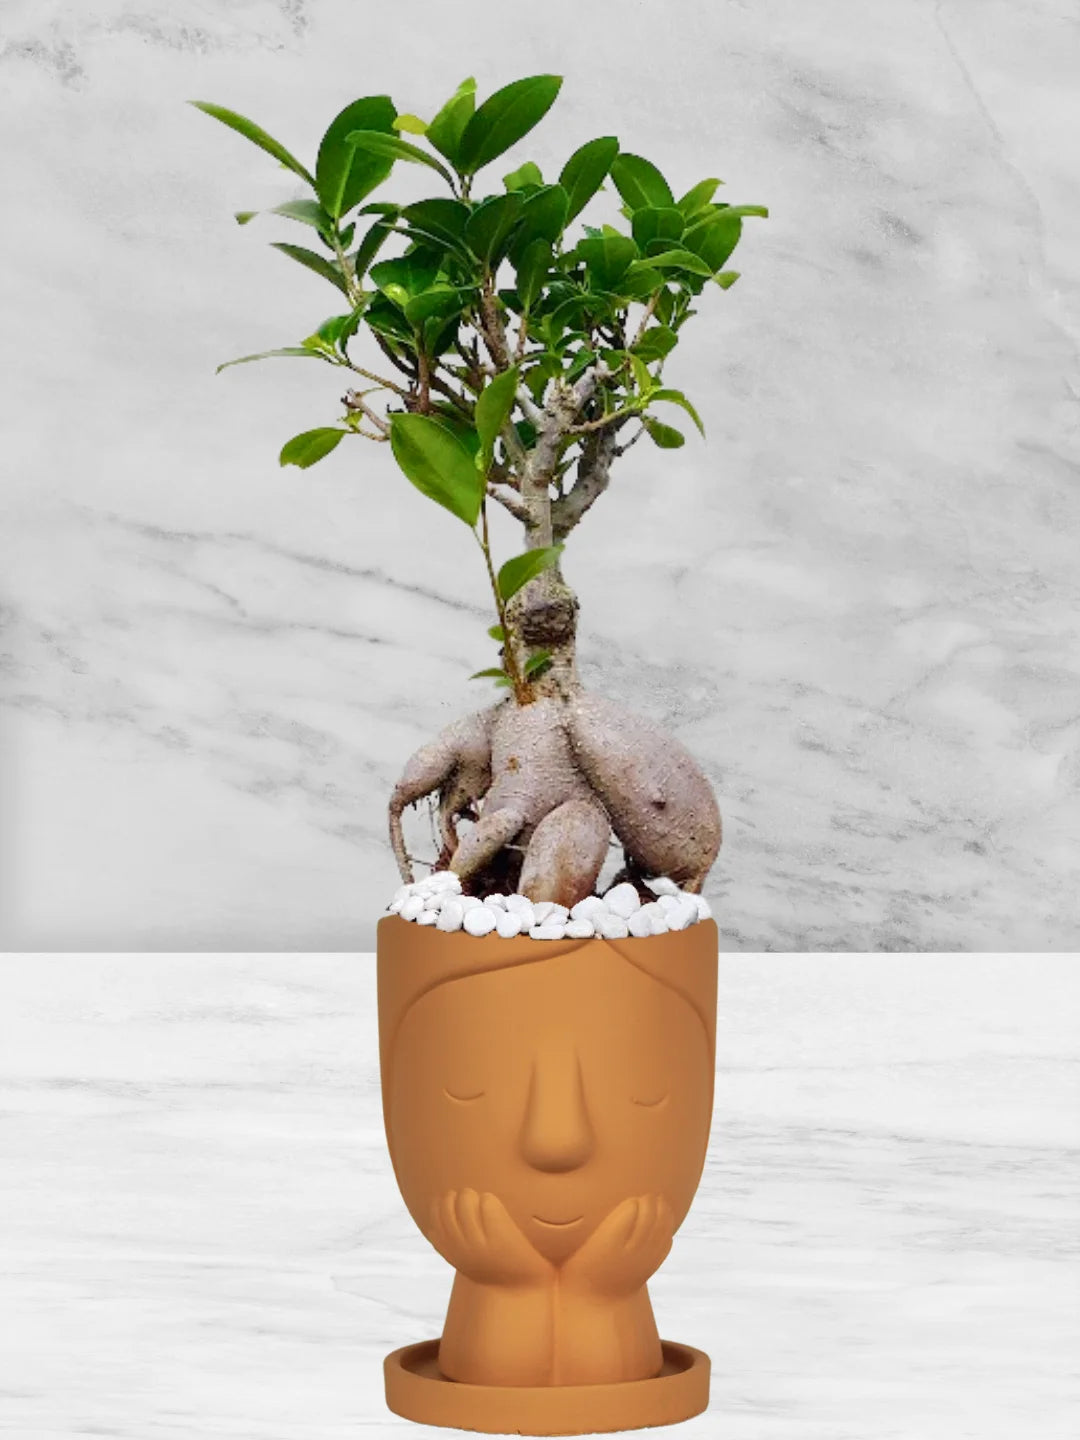 Potted-Bonsai-Tree-in-Adorable-Cute-Girl-Face-Planter-Terracotta-1